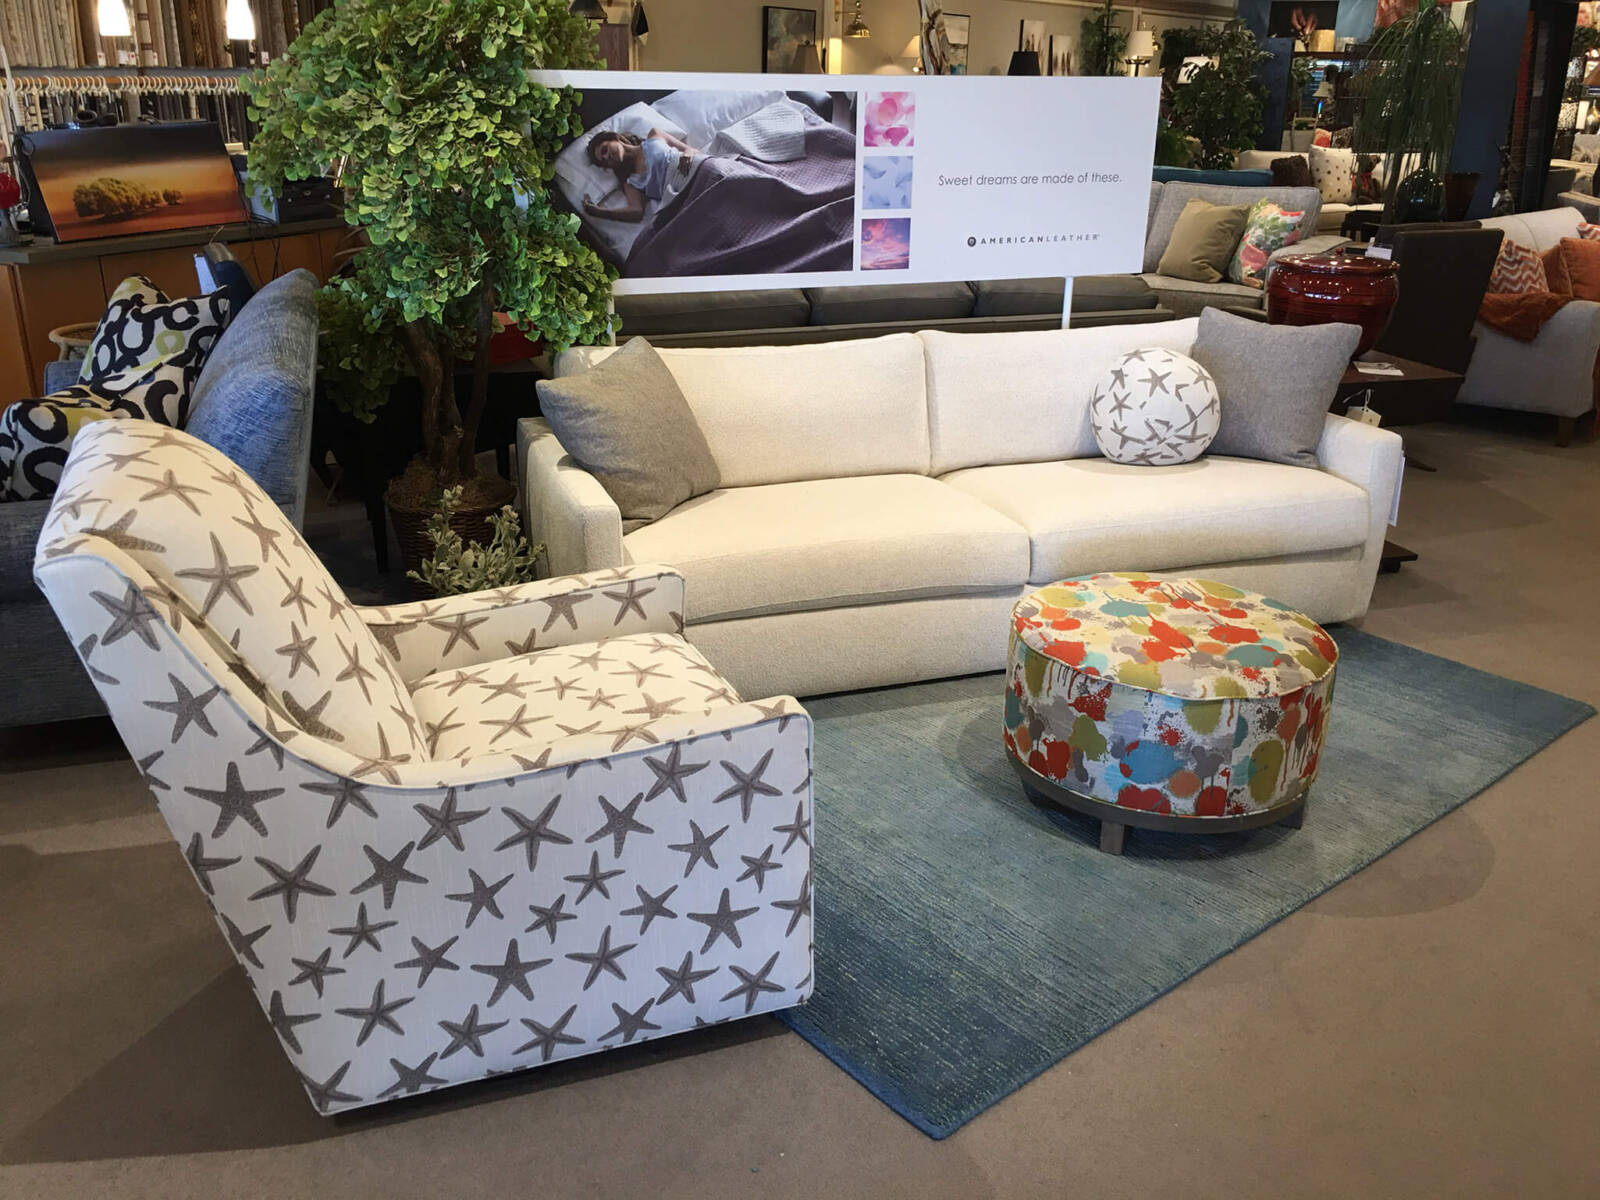 Carmet sofa from American Leather and Stephanie chair by Norwalk